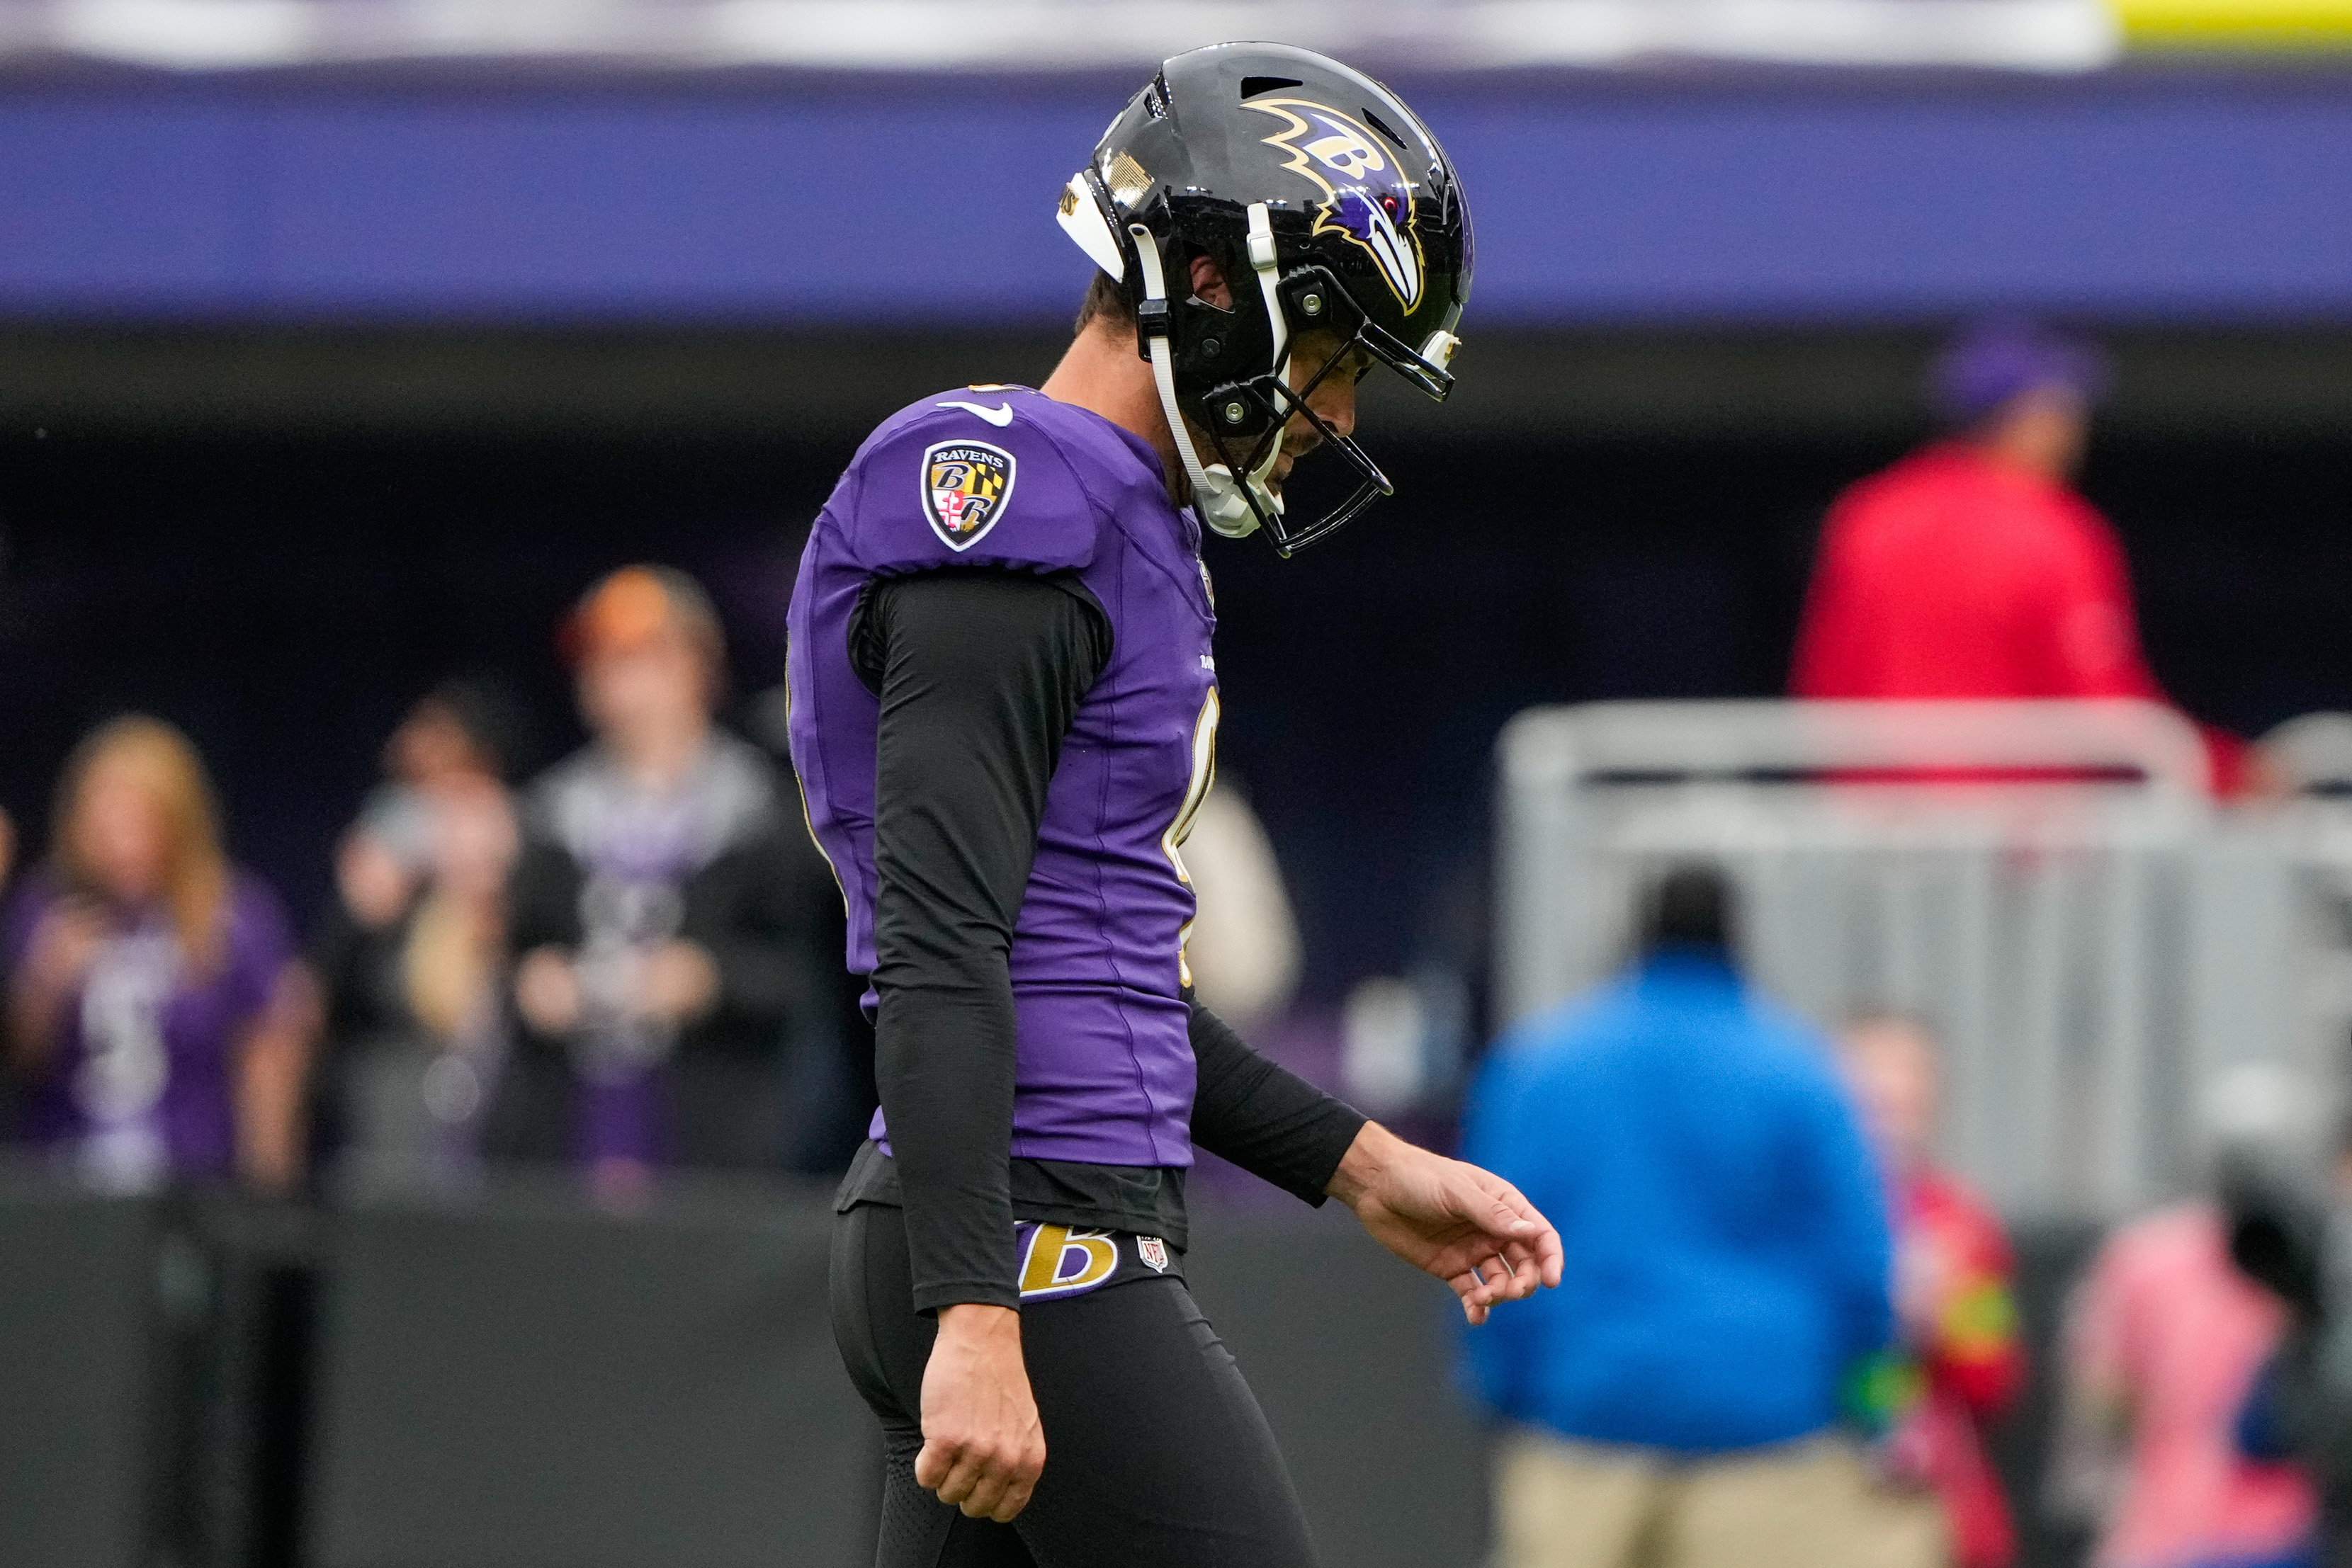 Ravens instant analysis: What we learned from their 22-19 loss to